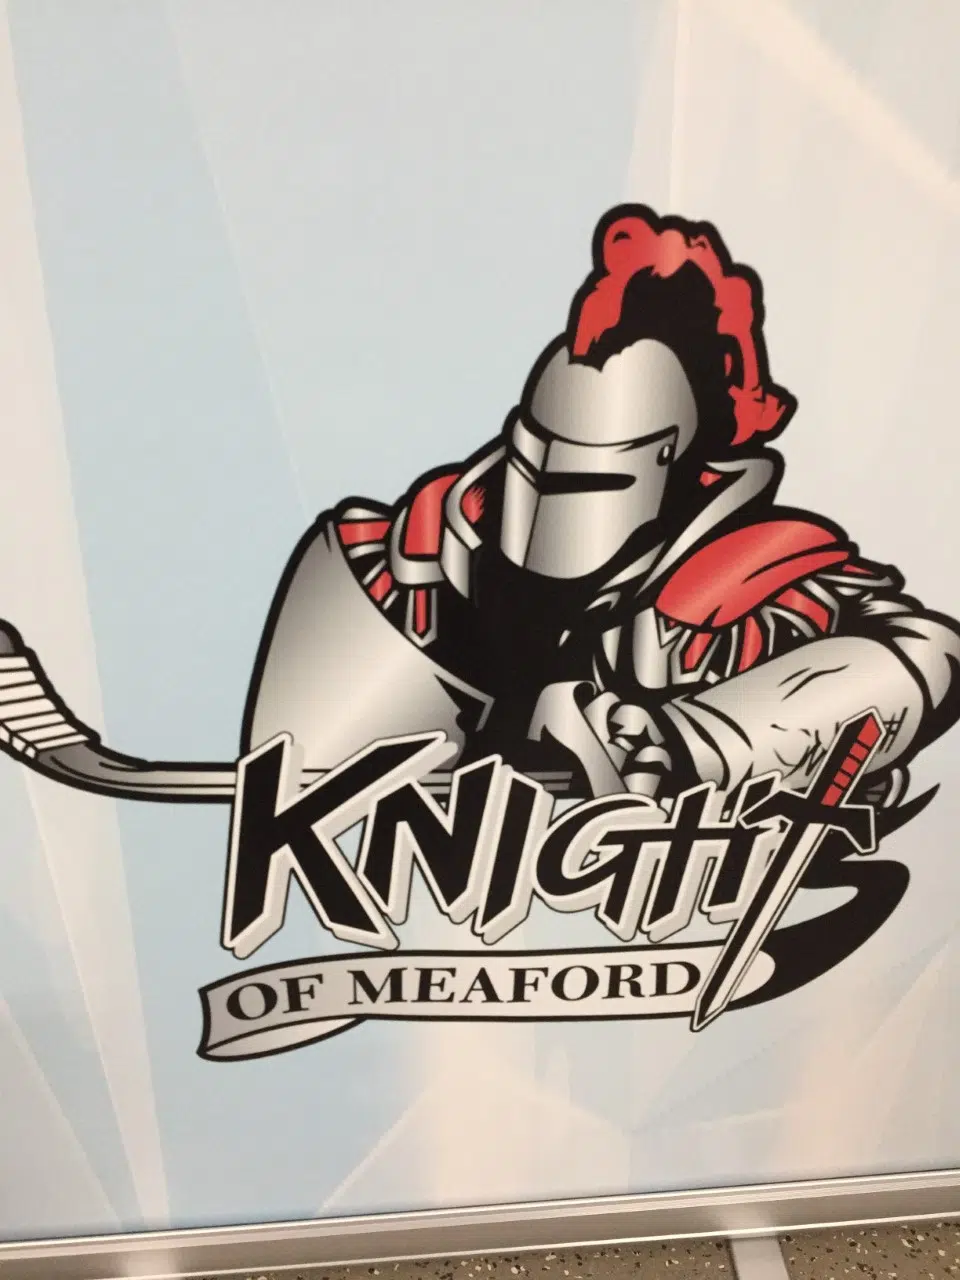 90s Knight in Meaford. Interview with Knights of Meaford Director of Scouting Danny Smith